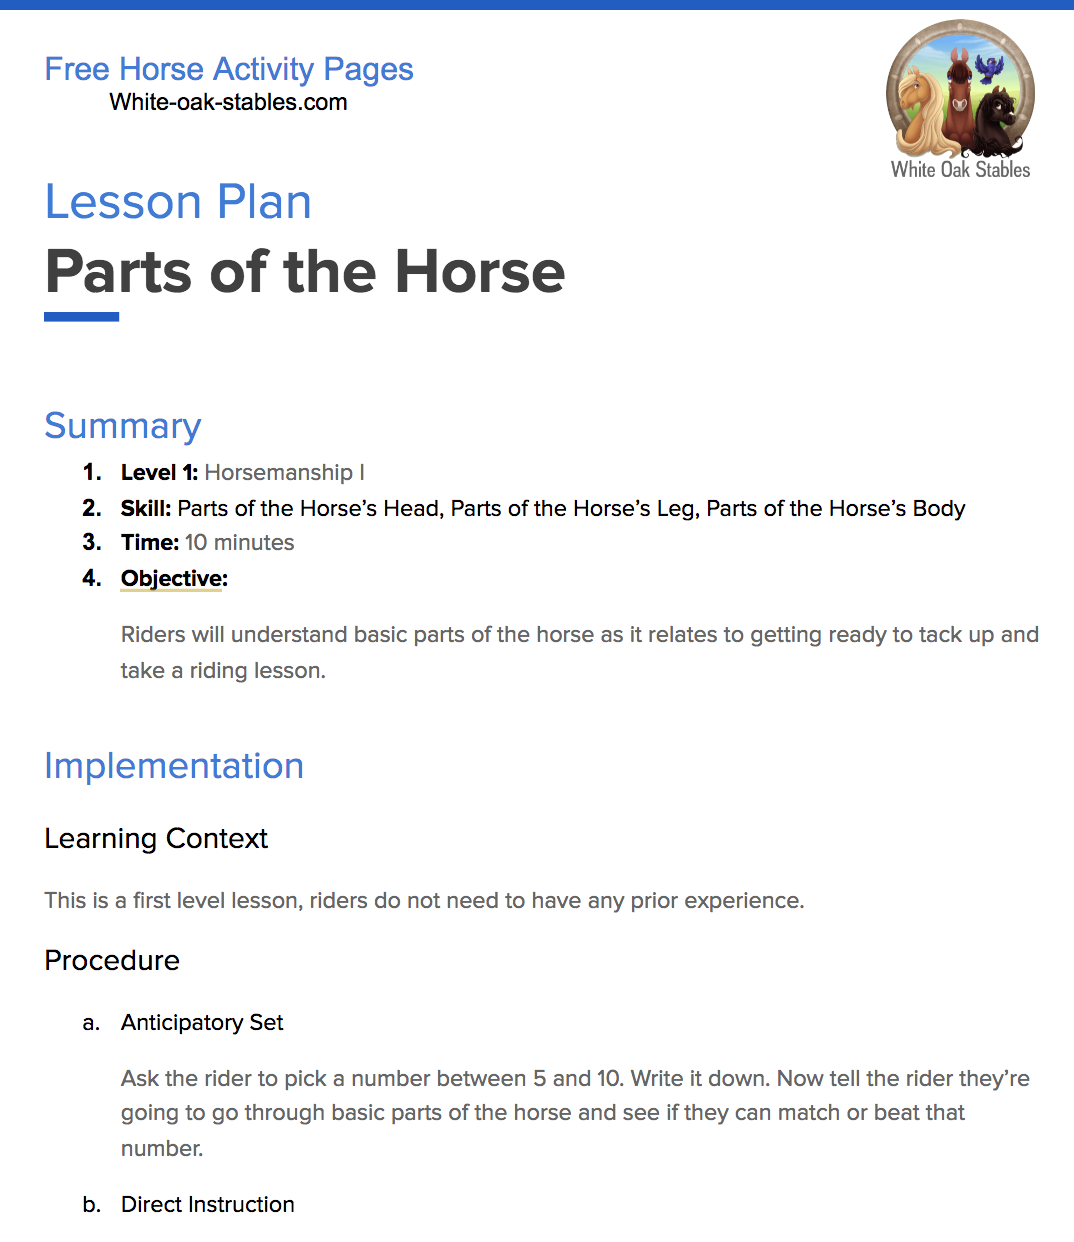 Lesson Plan – Parts of the Horse